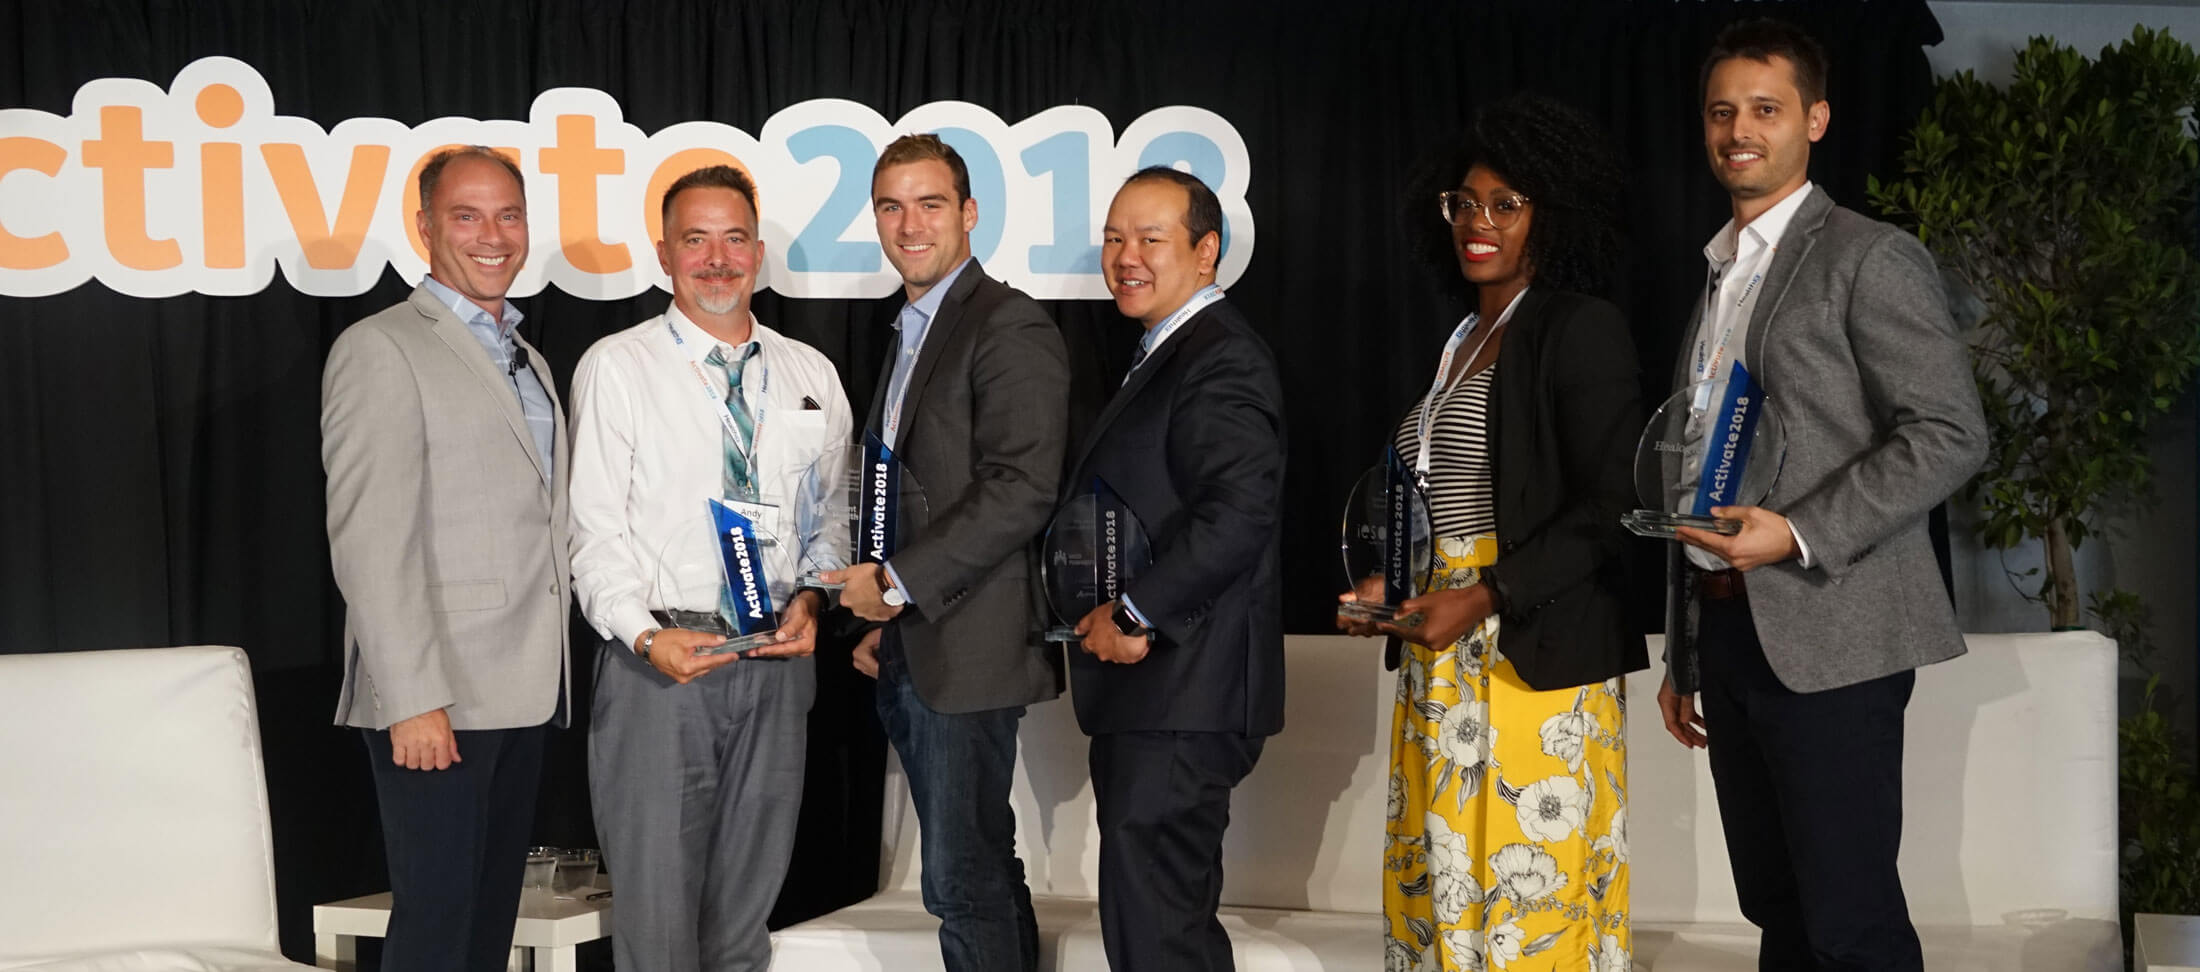 mPulse Mobile Recognizes Excellence in the Healthcare Industry with its First Annual Activate Awards